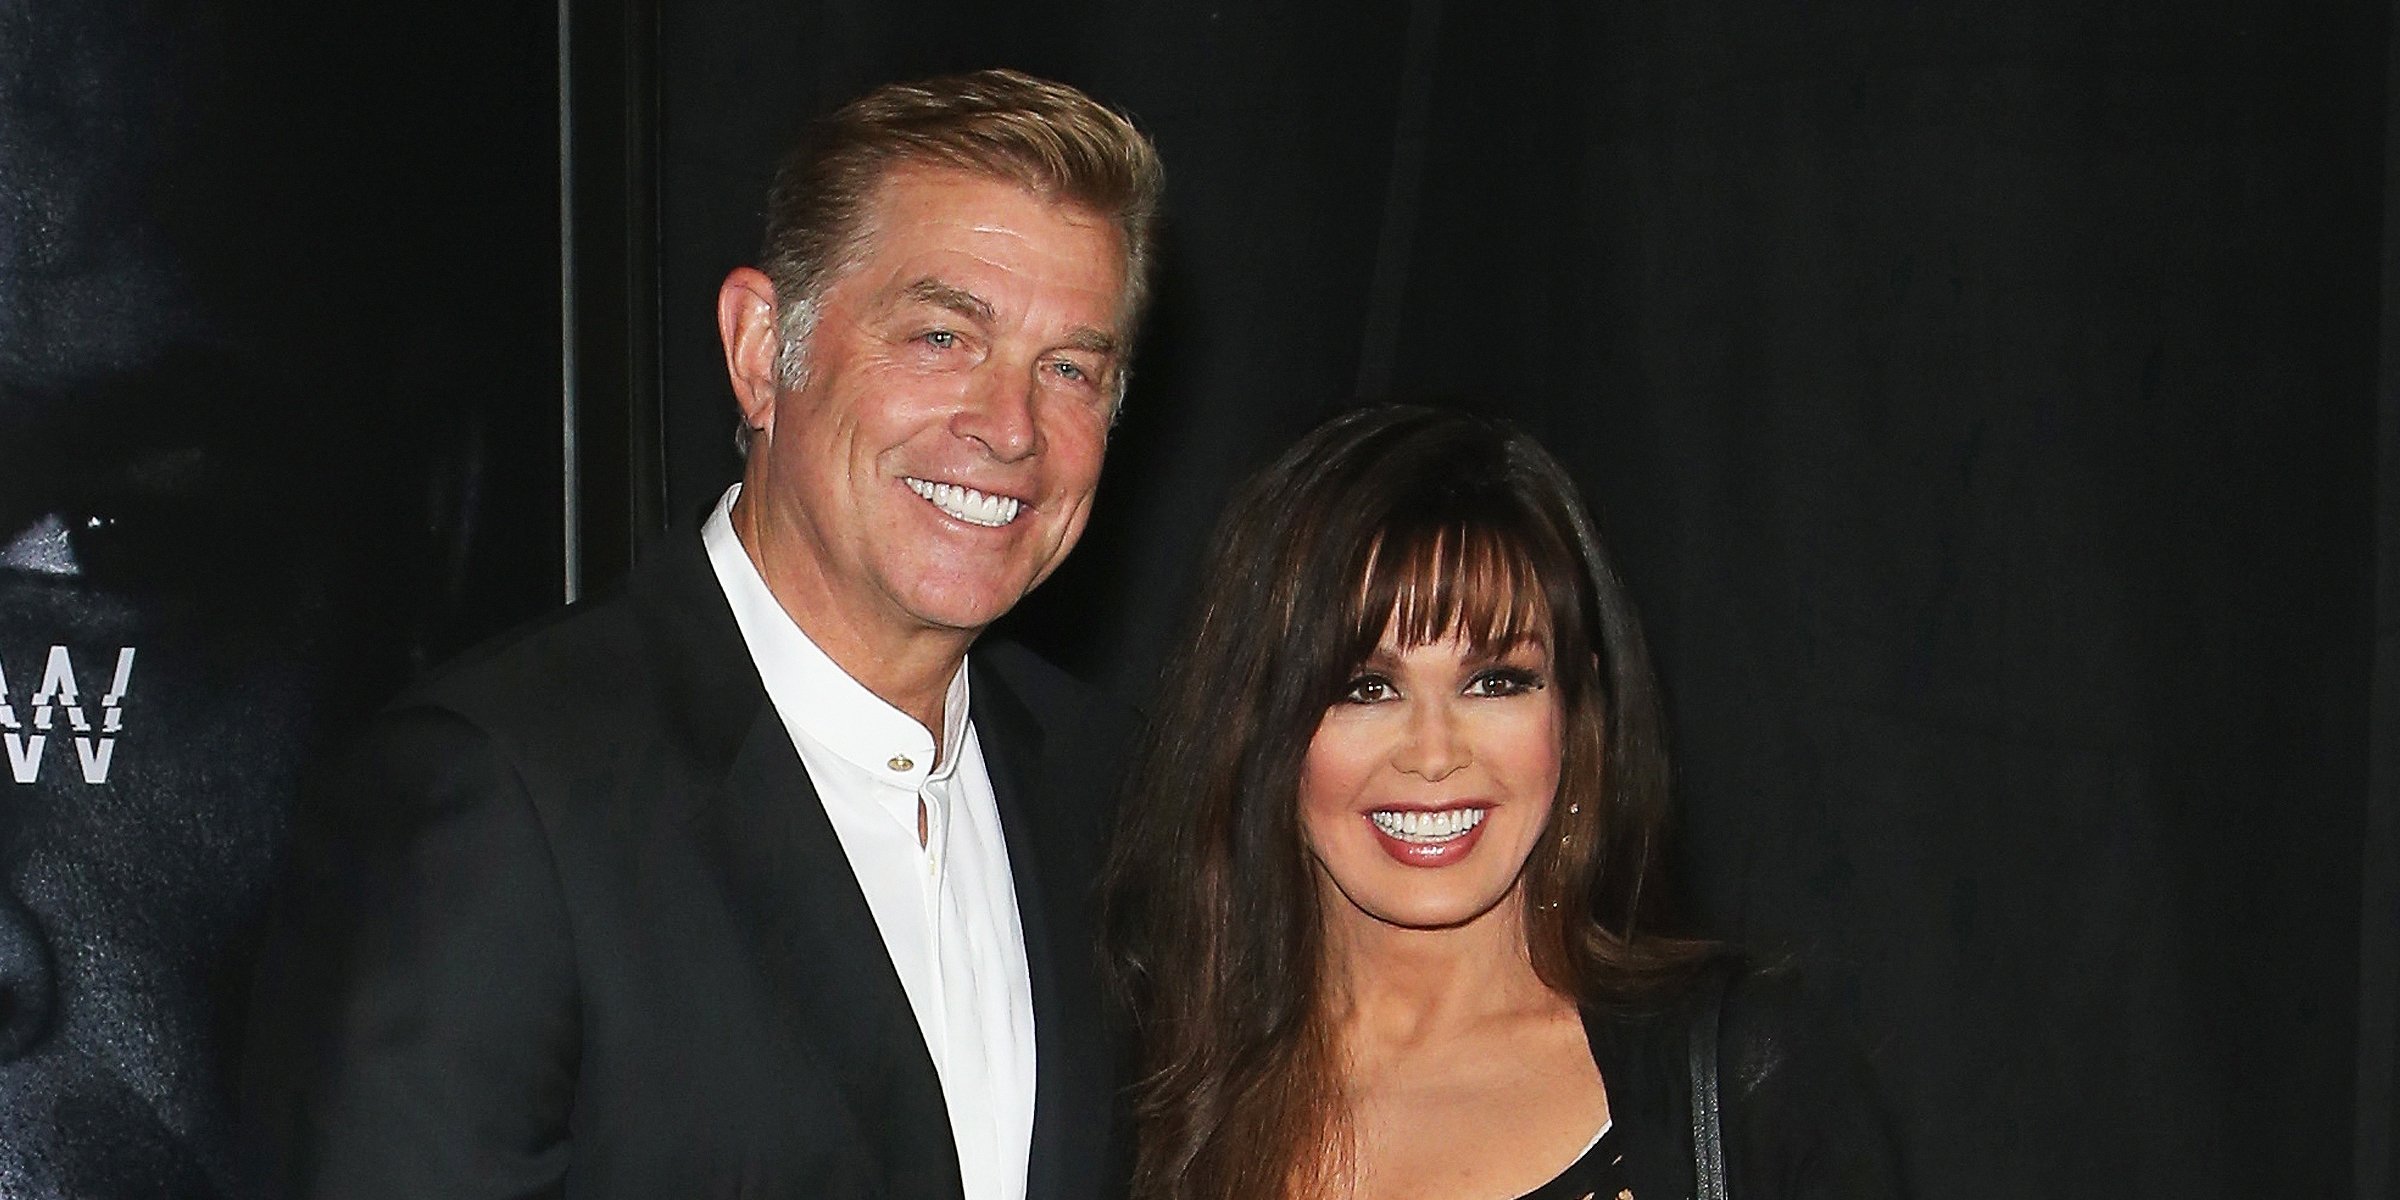 Marie Osmond and her husband Steve Craig | Source: Getty Images